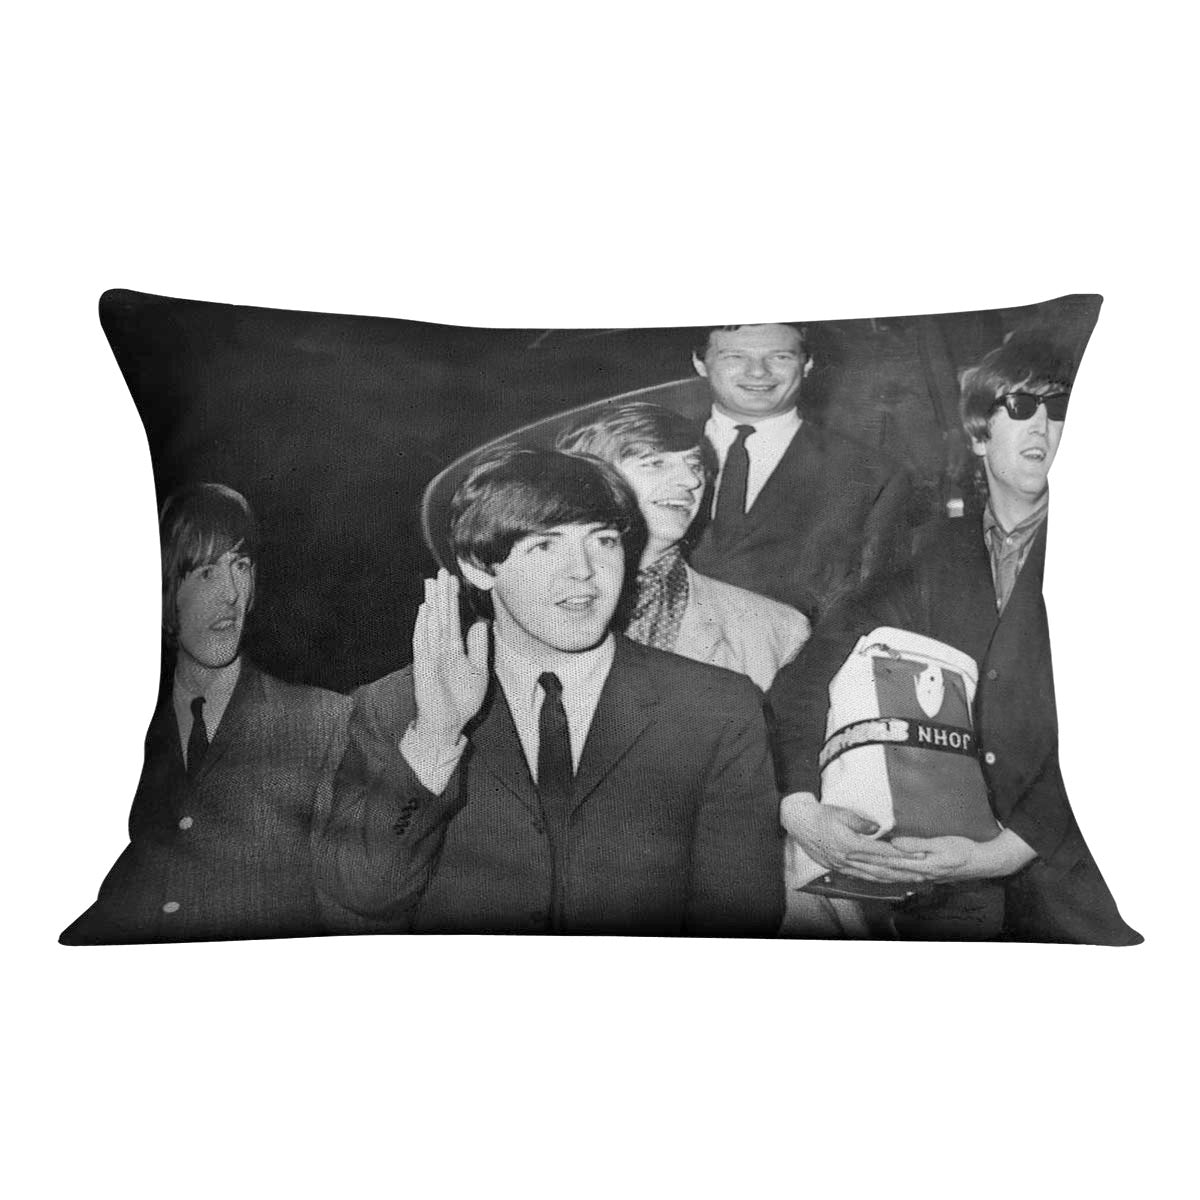 The Beatles with Brian Epstein at London Airport Cushion